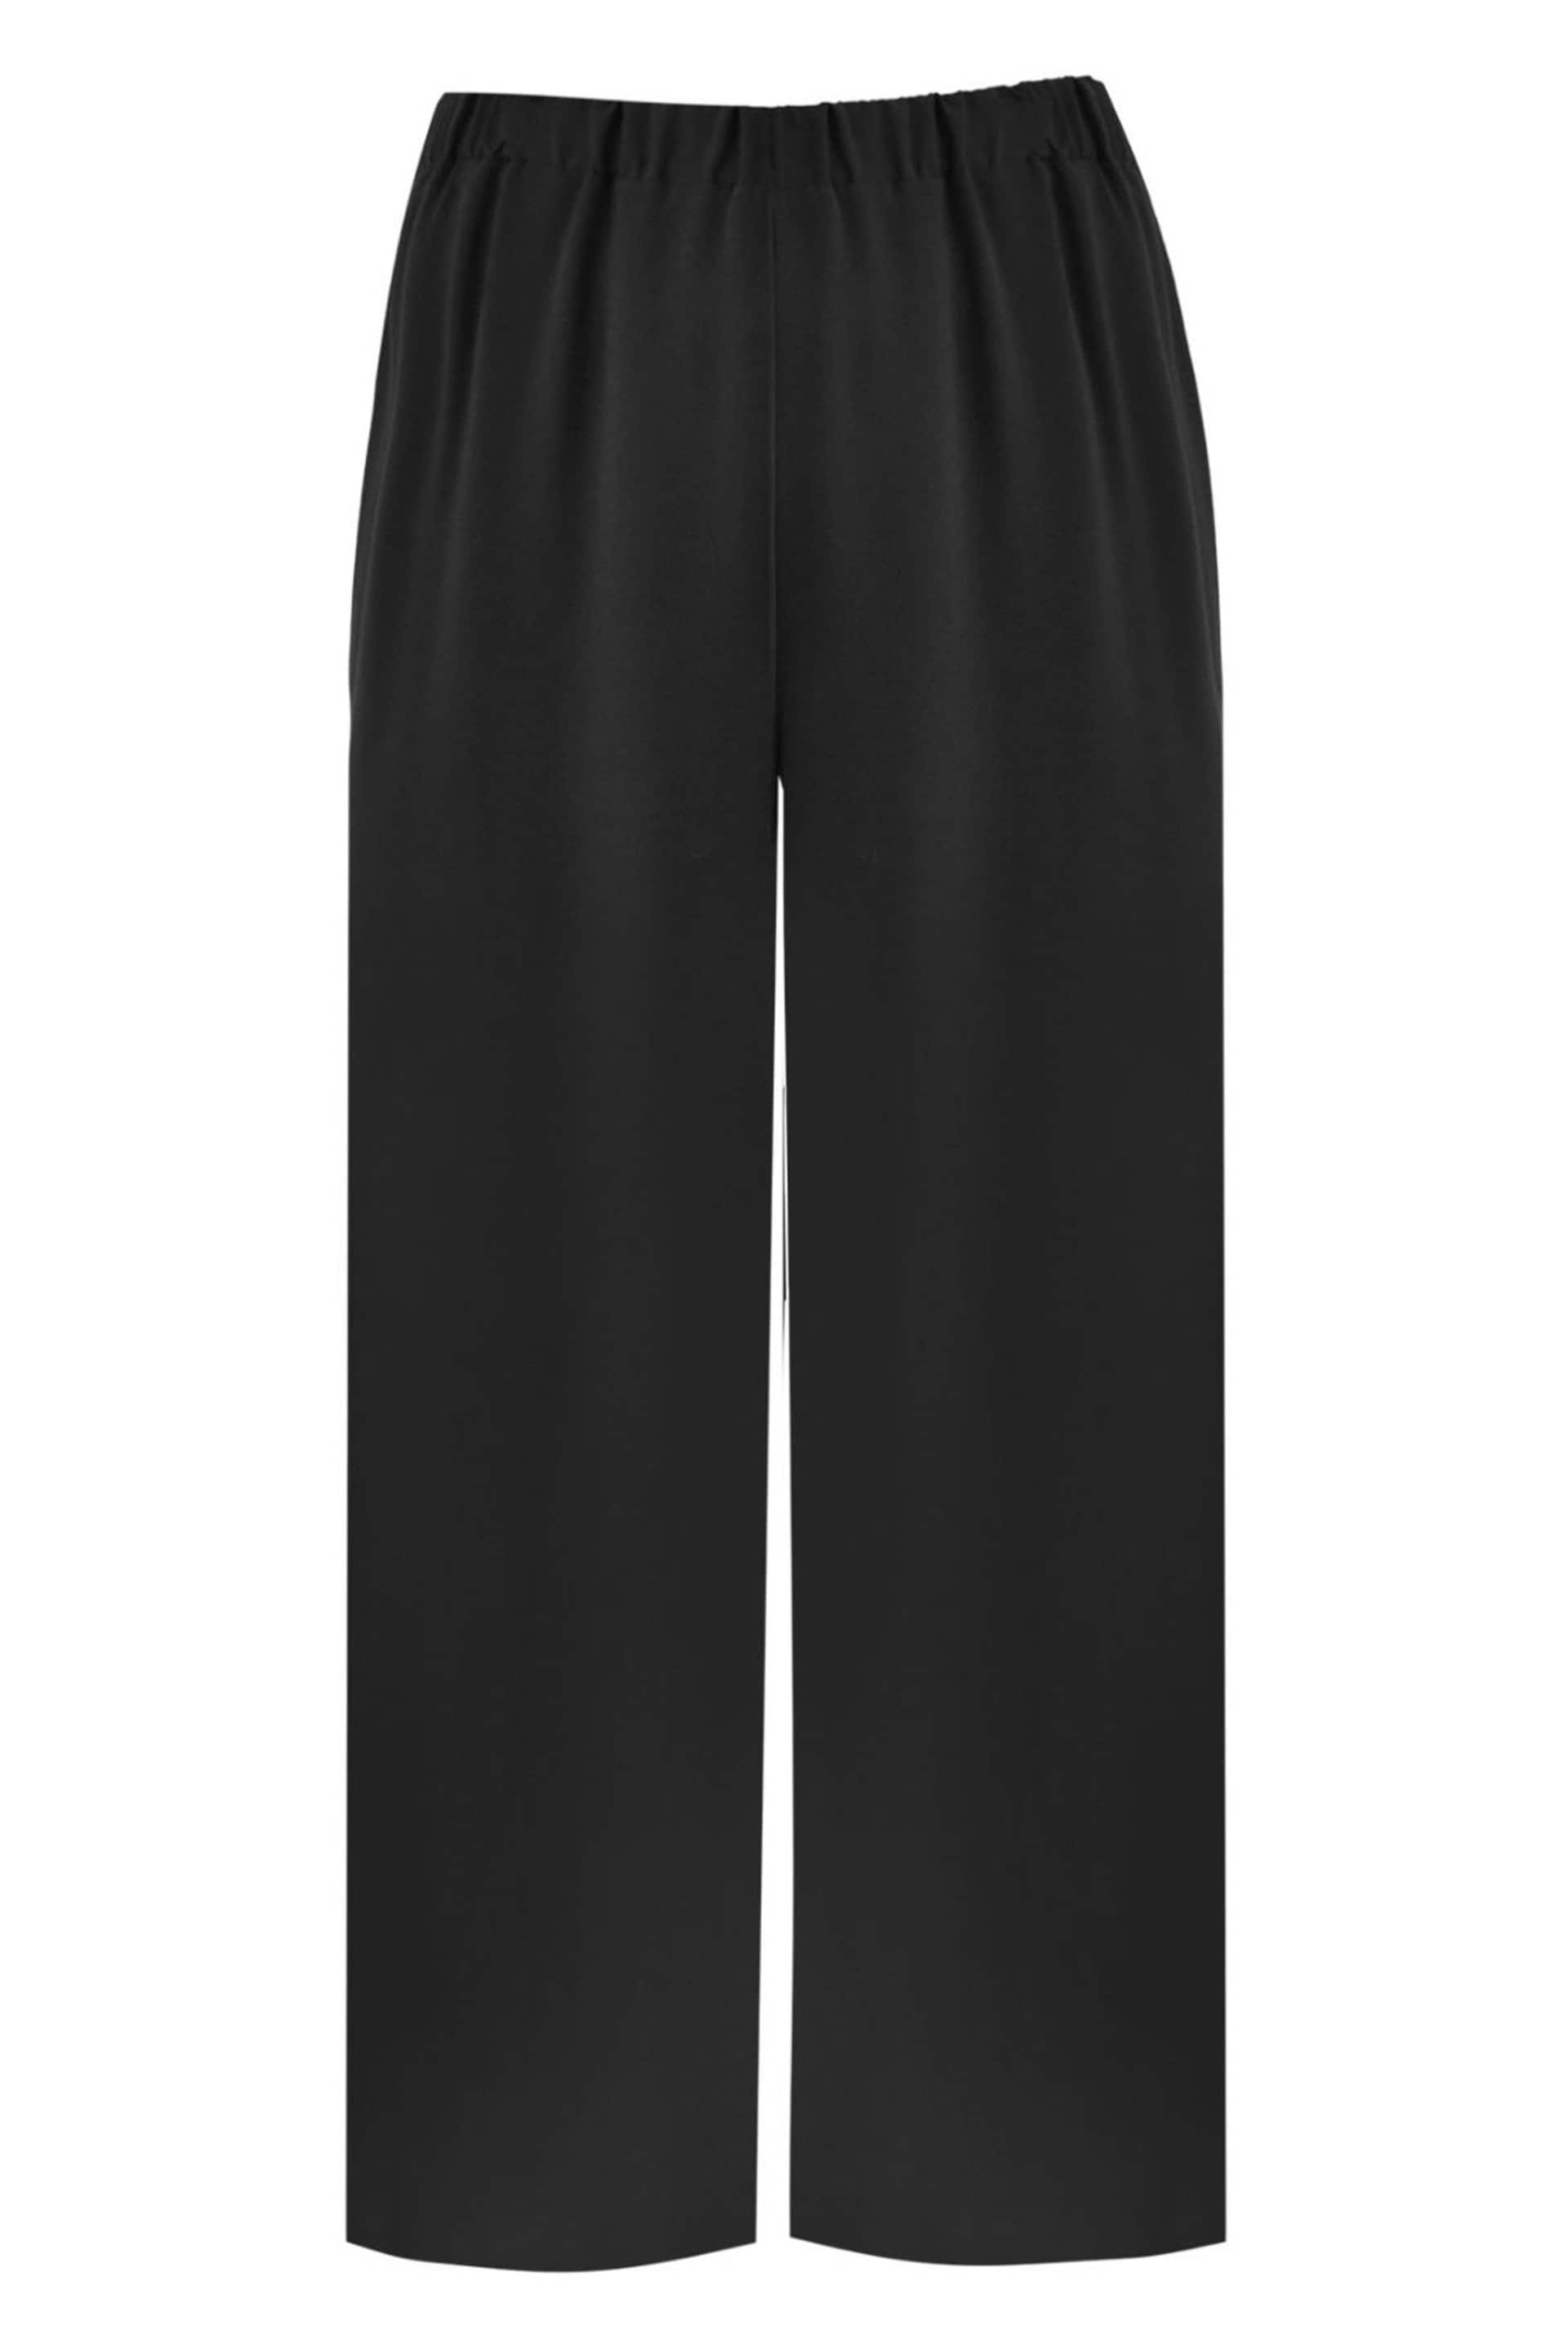 Live Unlimited Curve Petite Black Pull-On Cropped Trousers - Image 4 of 5